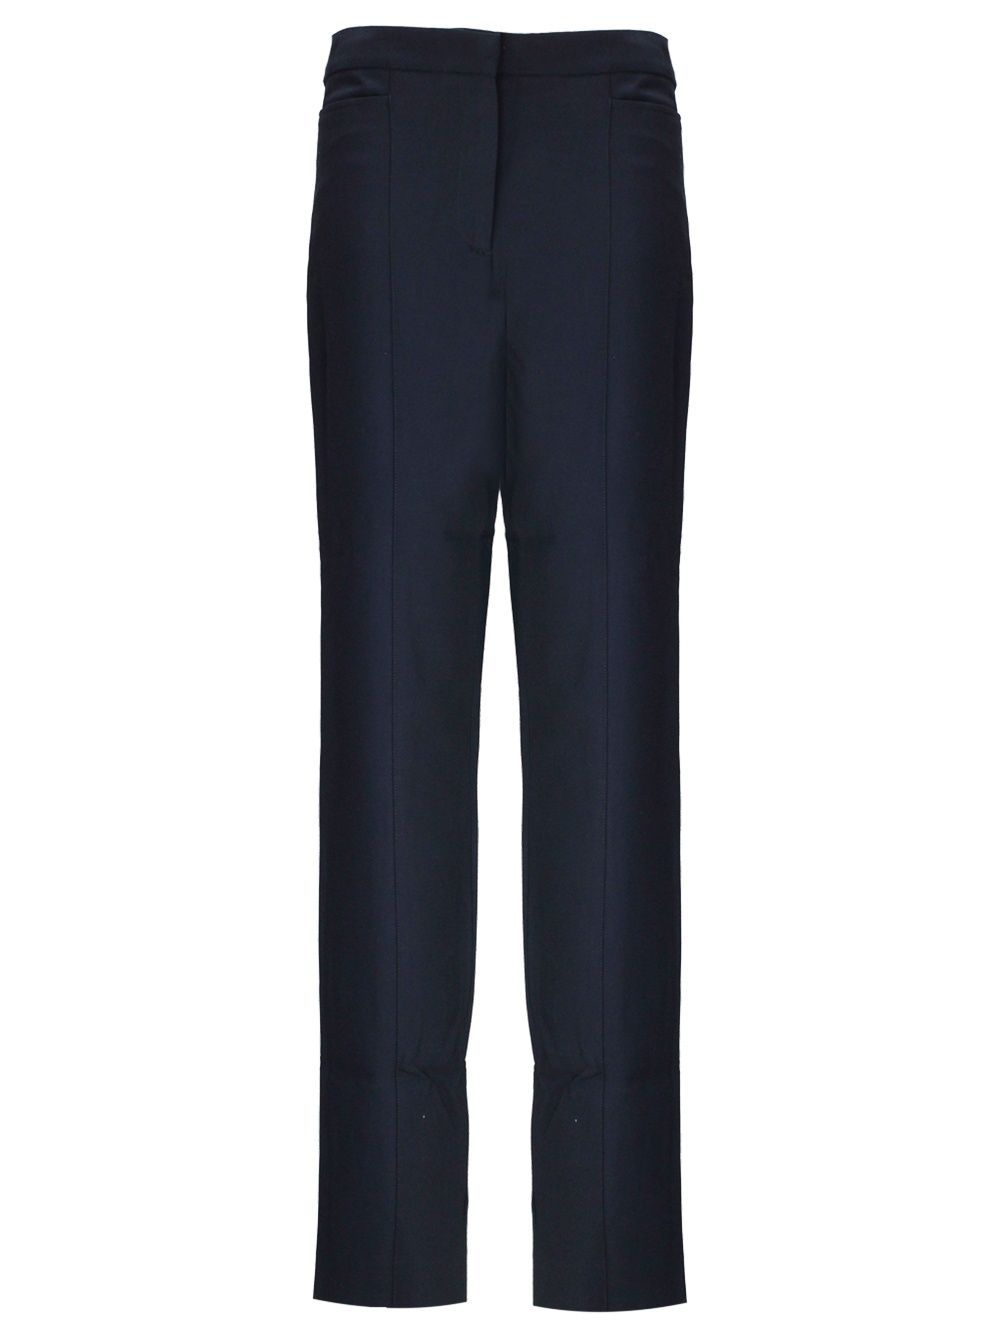 Slim fit tailored trousers